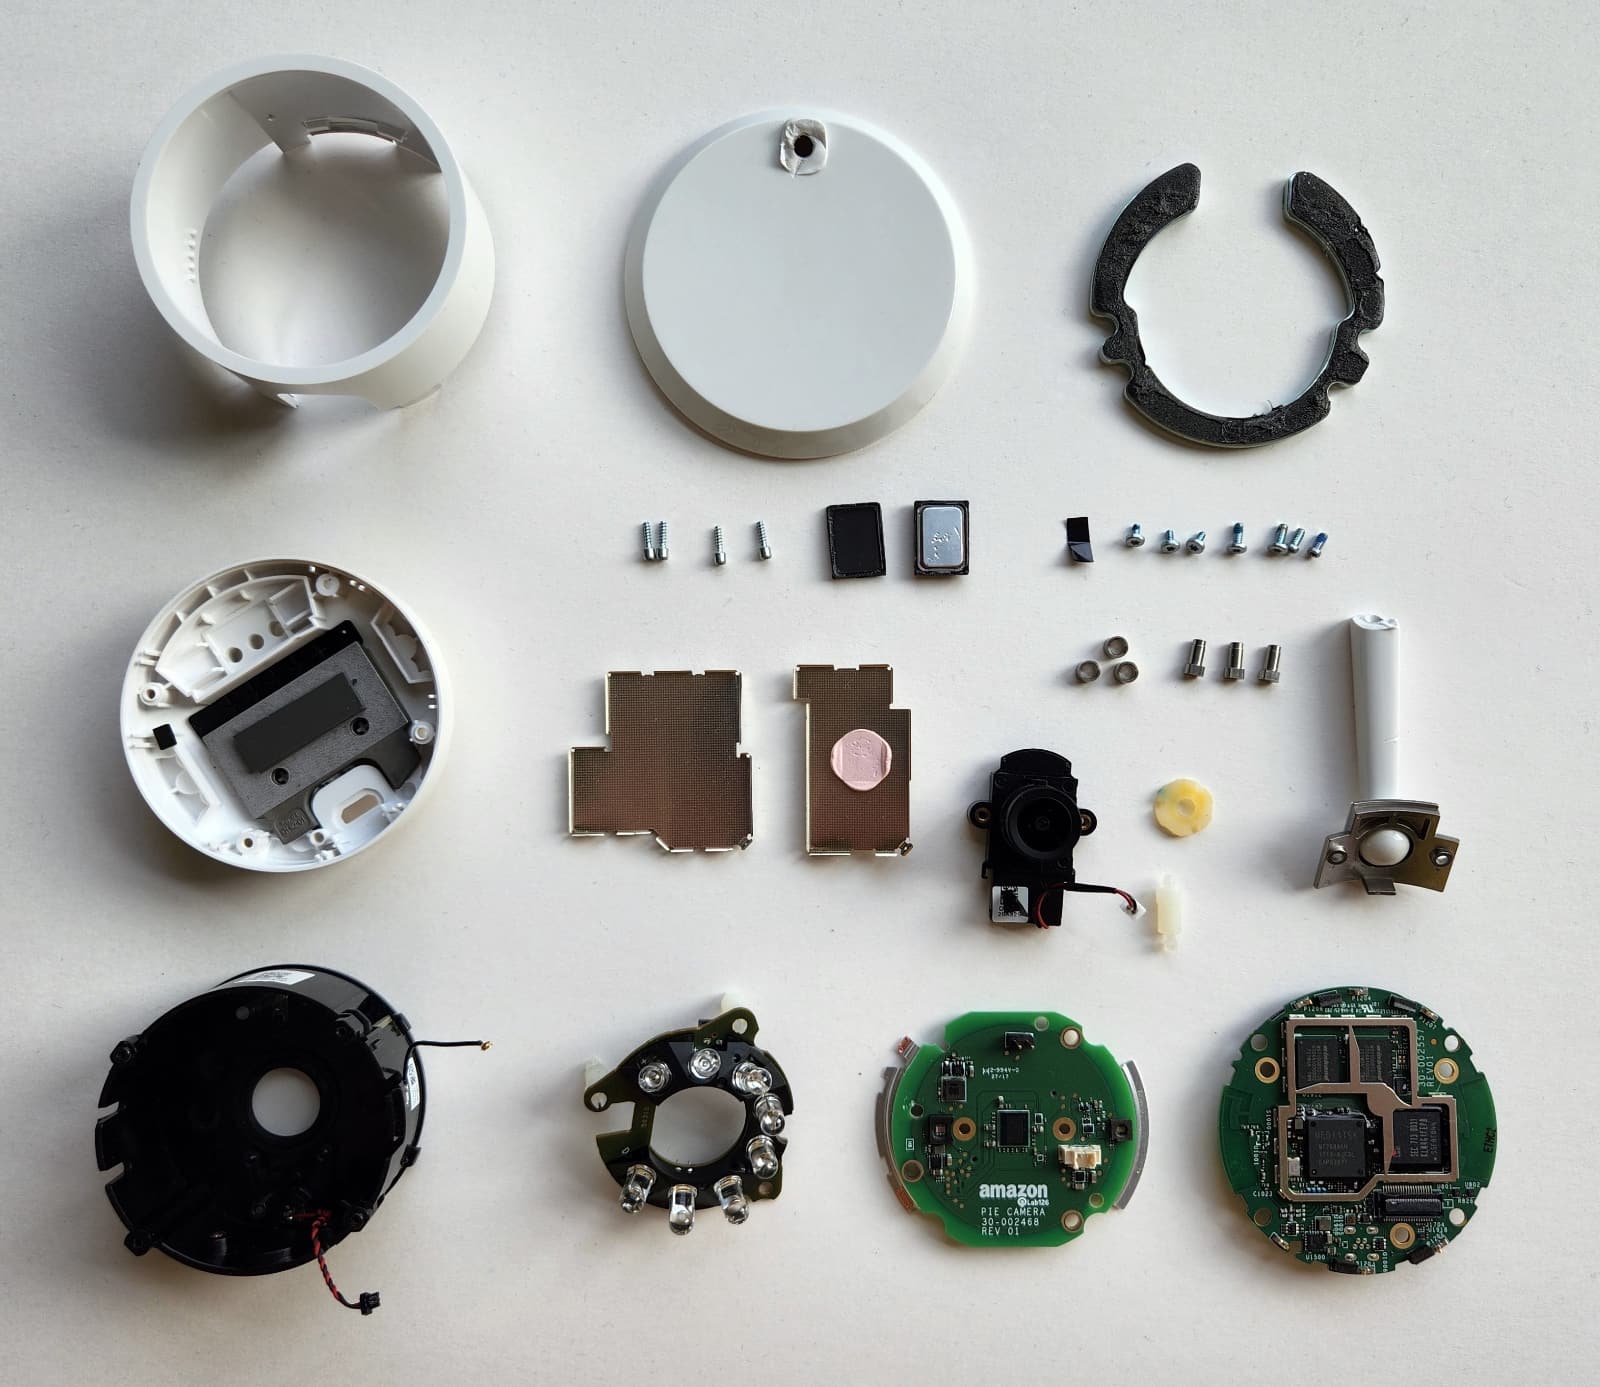 Cloud Cam components: 5 body pieces, 3 circuit boards, 11 screws, a small speaker and grill, 2 heat sinks, and the circuit boards from above